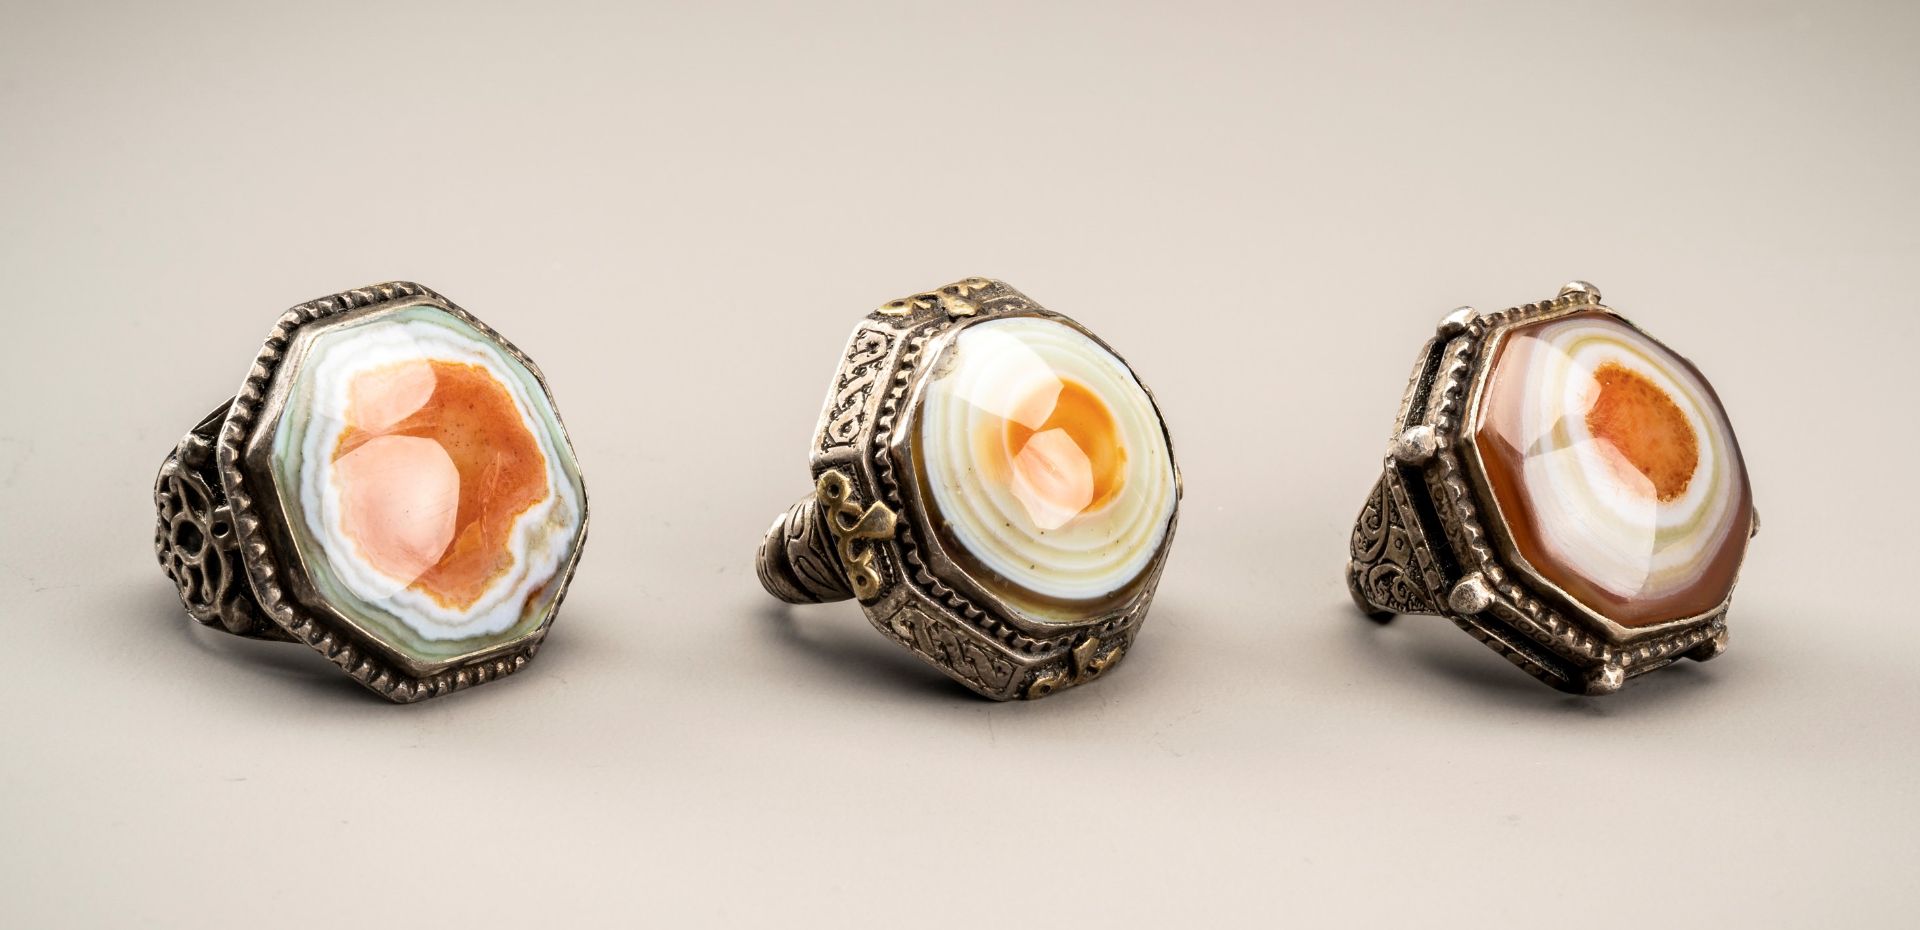 A GROUP OF THREE HIMALAYAN BUDDHA EYE AGATE INSET SILVER RINGS